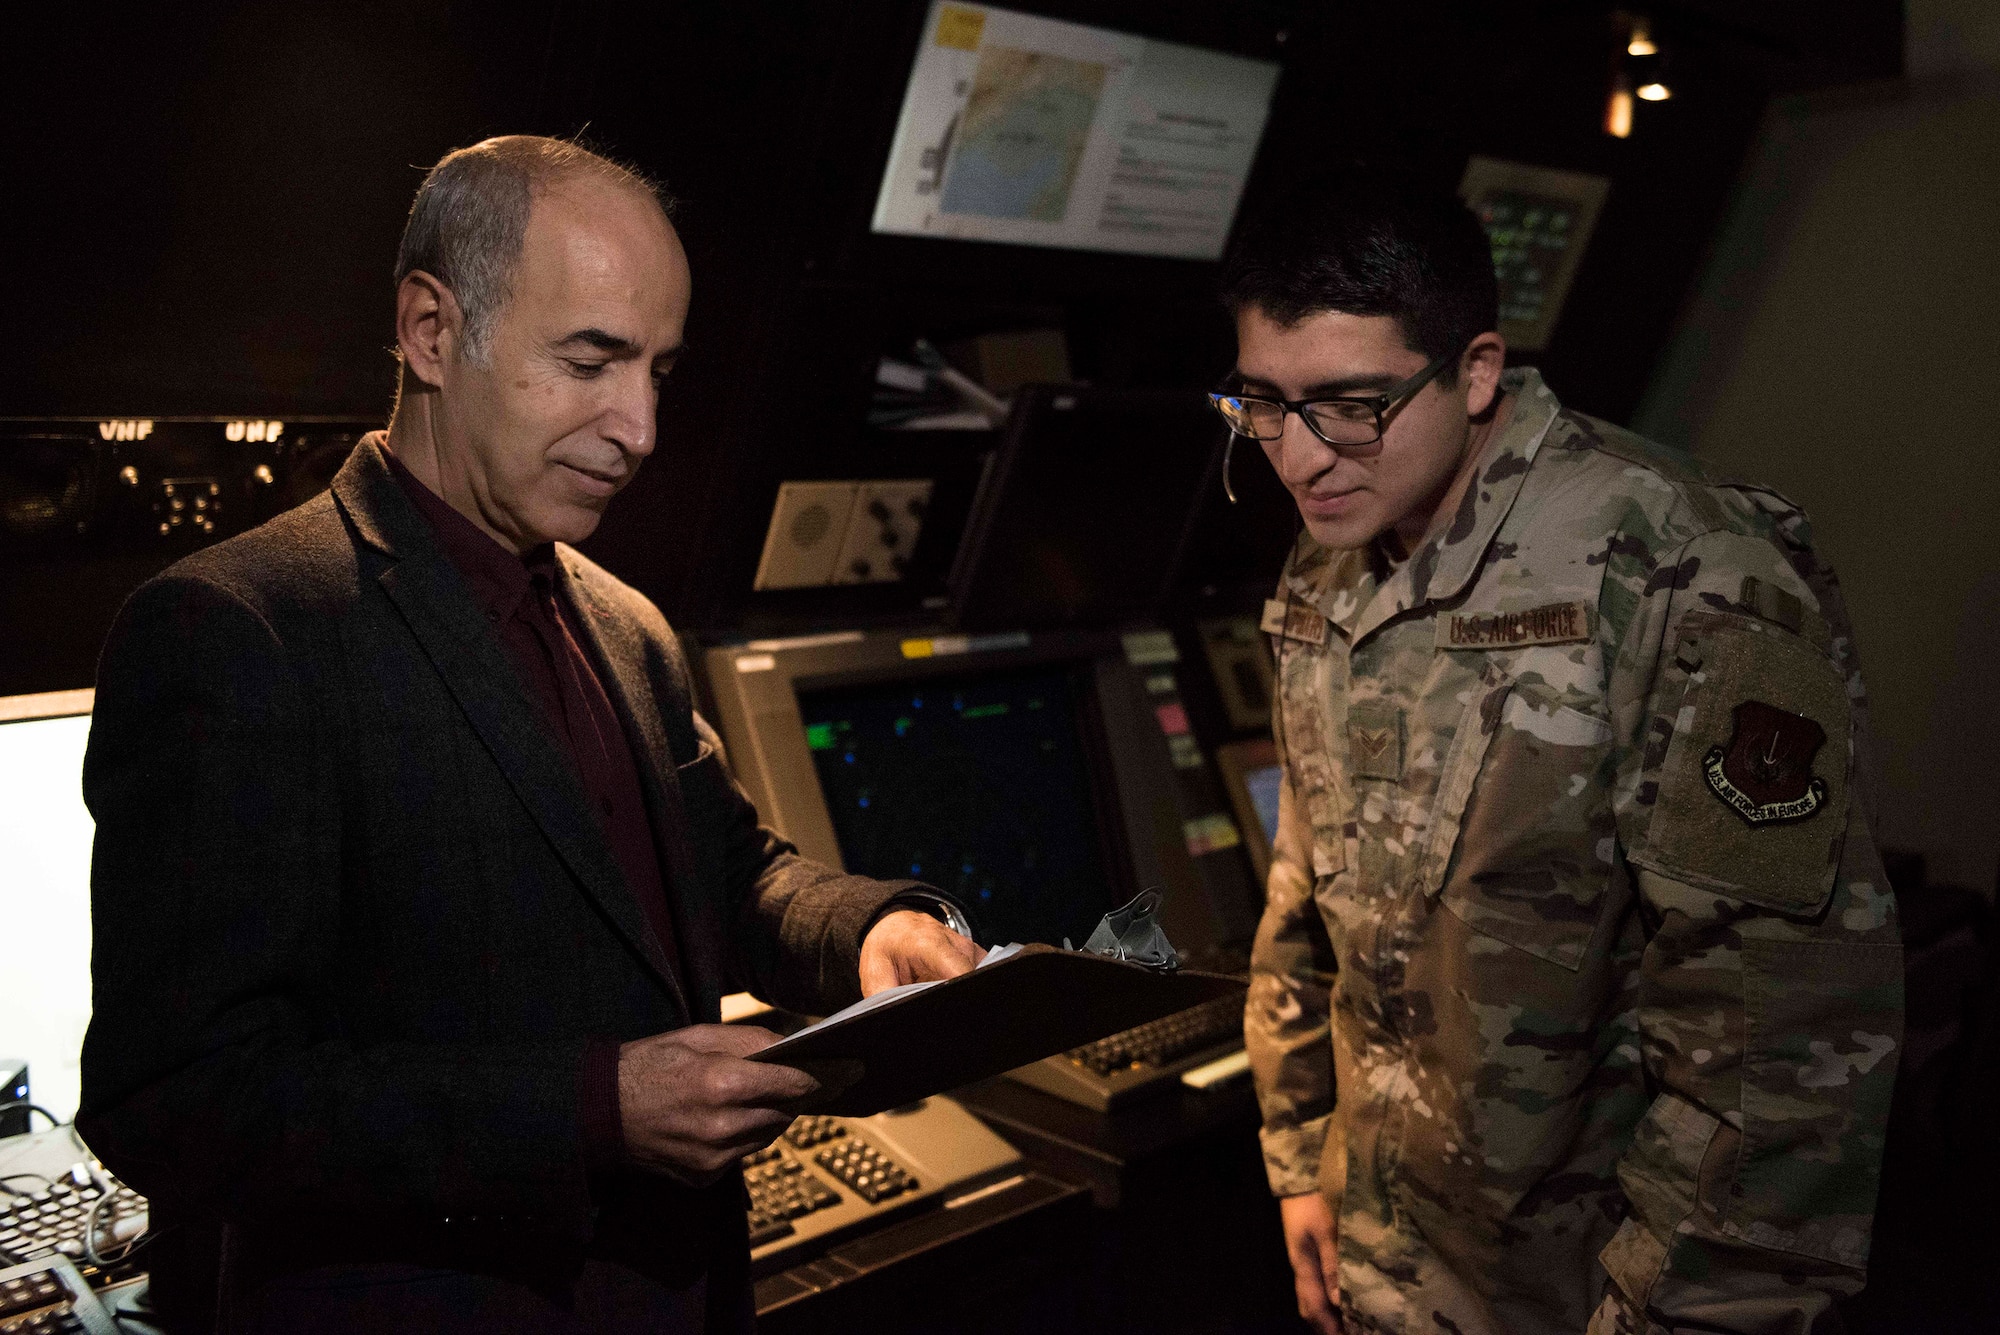 Sedat Arabaci, 39th Operations Support Squadron interpreter (left), discusses English-to-Turkish translation with U.S. Air Force Senior Airman Matthew Fouard, 39th OSS air traffic controller, Nov. 25, 2019, at Incirlik Air Base, Turkey. Turkish authorities share their airspace in Incirlik with the U.S. Air Force, making communication with the Turkish vital to the safety of aerospace operations. (U.S. Air Force photo by Staff Sgt. Joshua Magbanua)